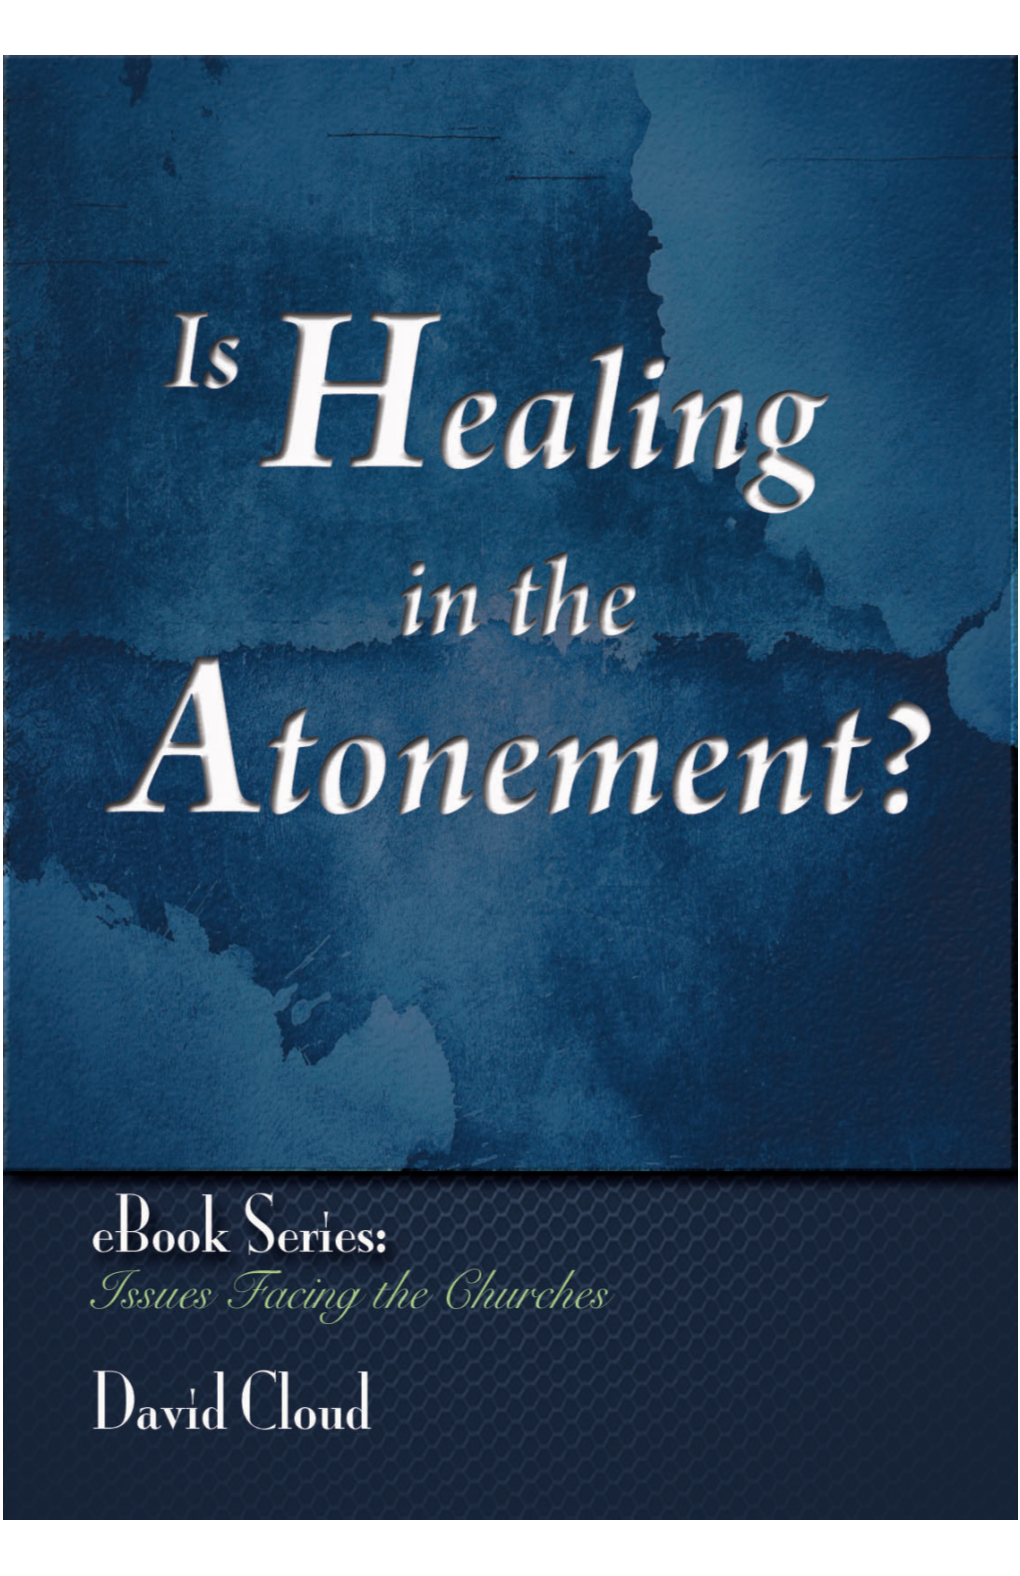 Is Healing in the Atonement? Copyright 1998 by David W